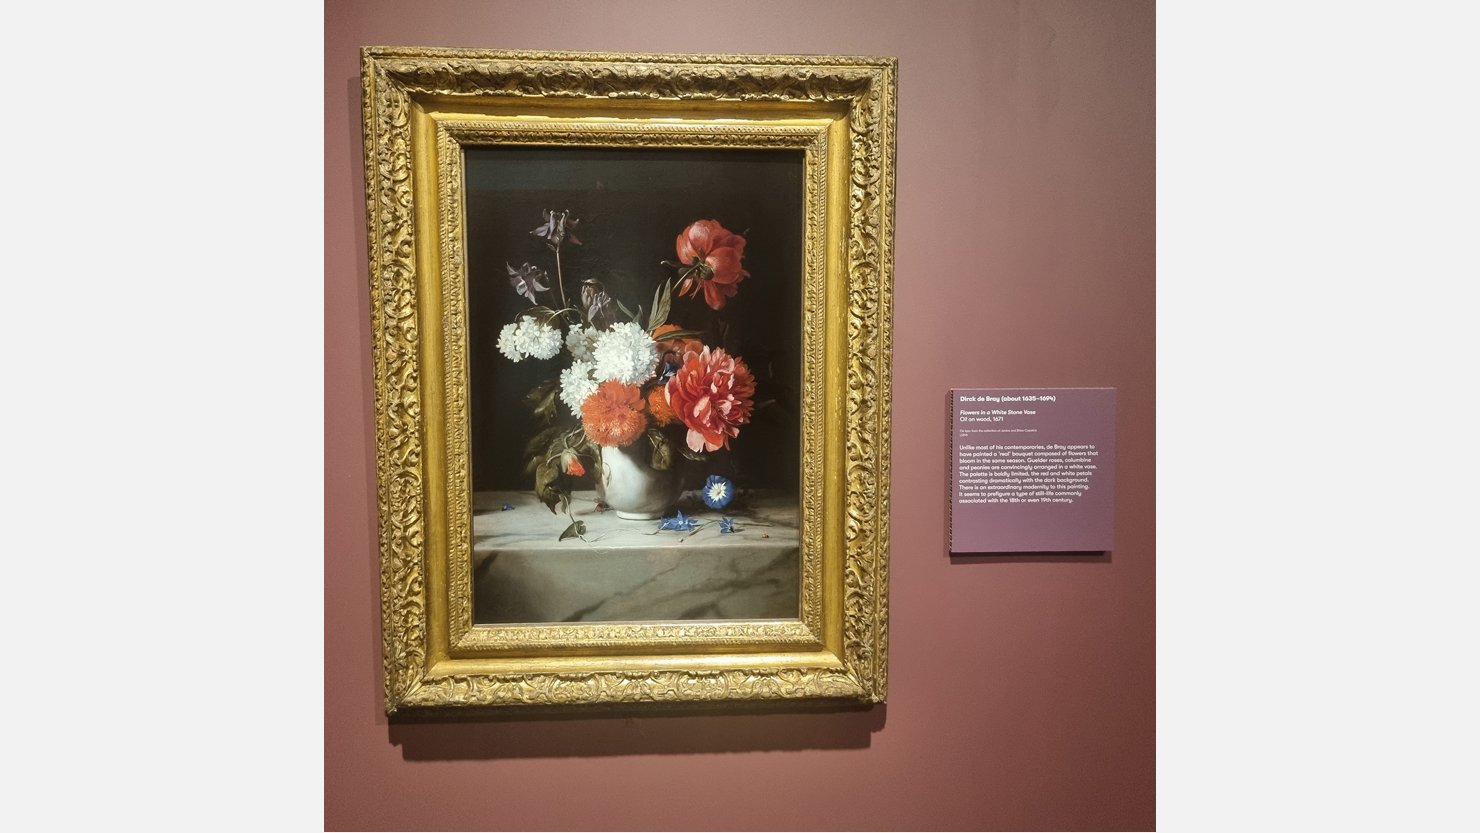 Flowers in a White Stone Vase, 1671. On loan from the collection of Janice and Brian Capstick.